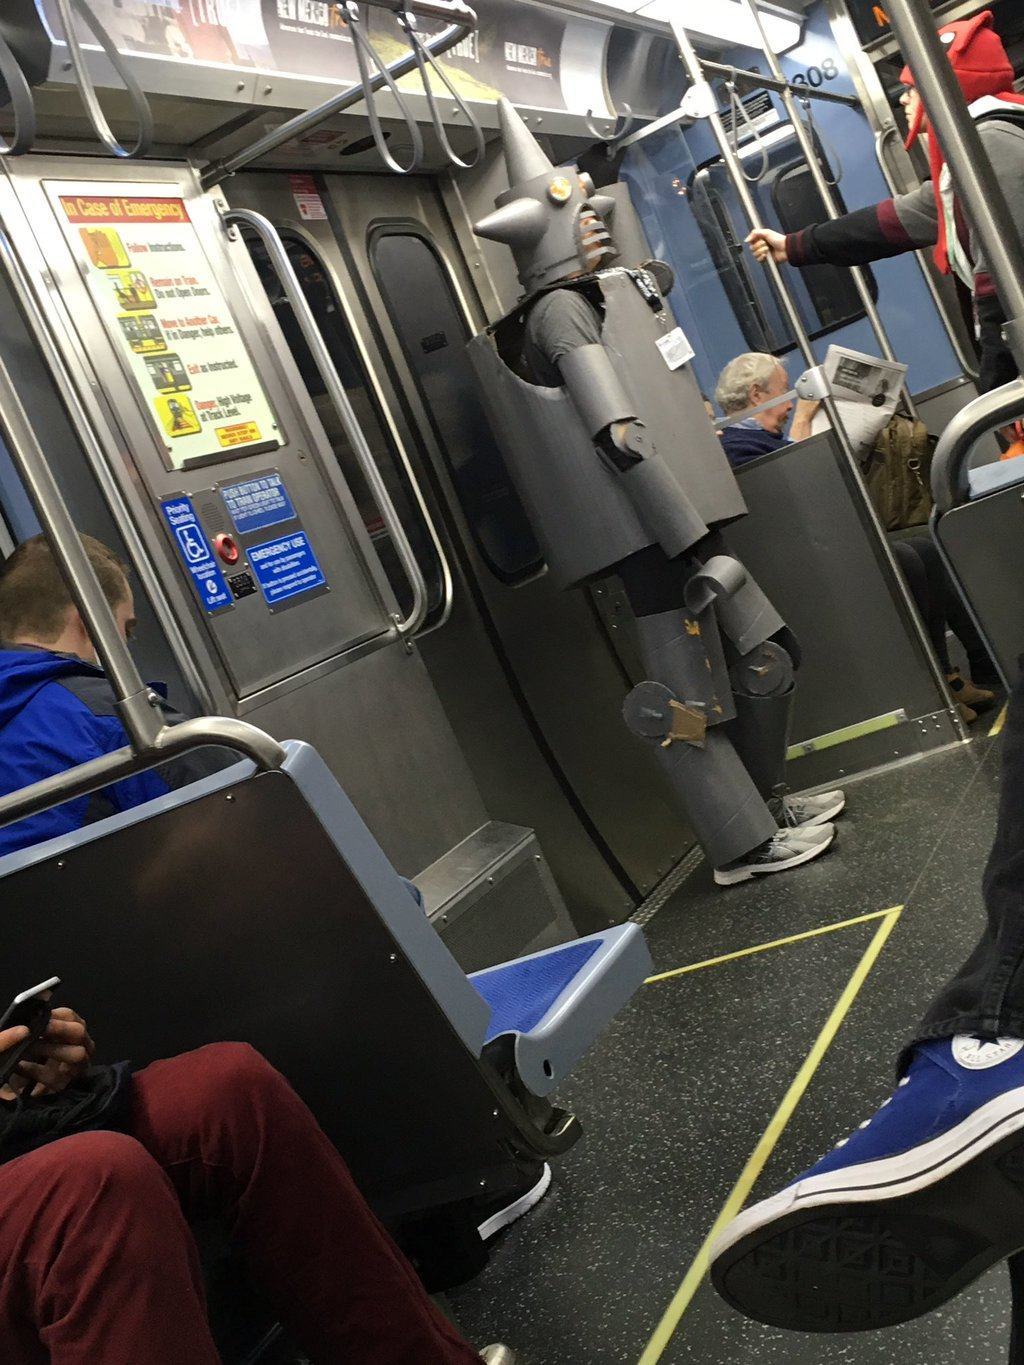 Meanwhile on the Red Line…